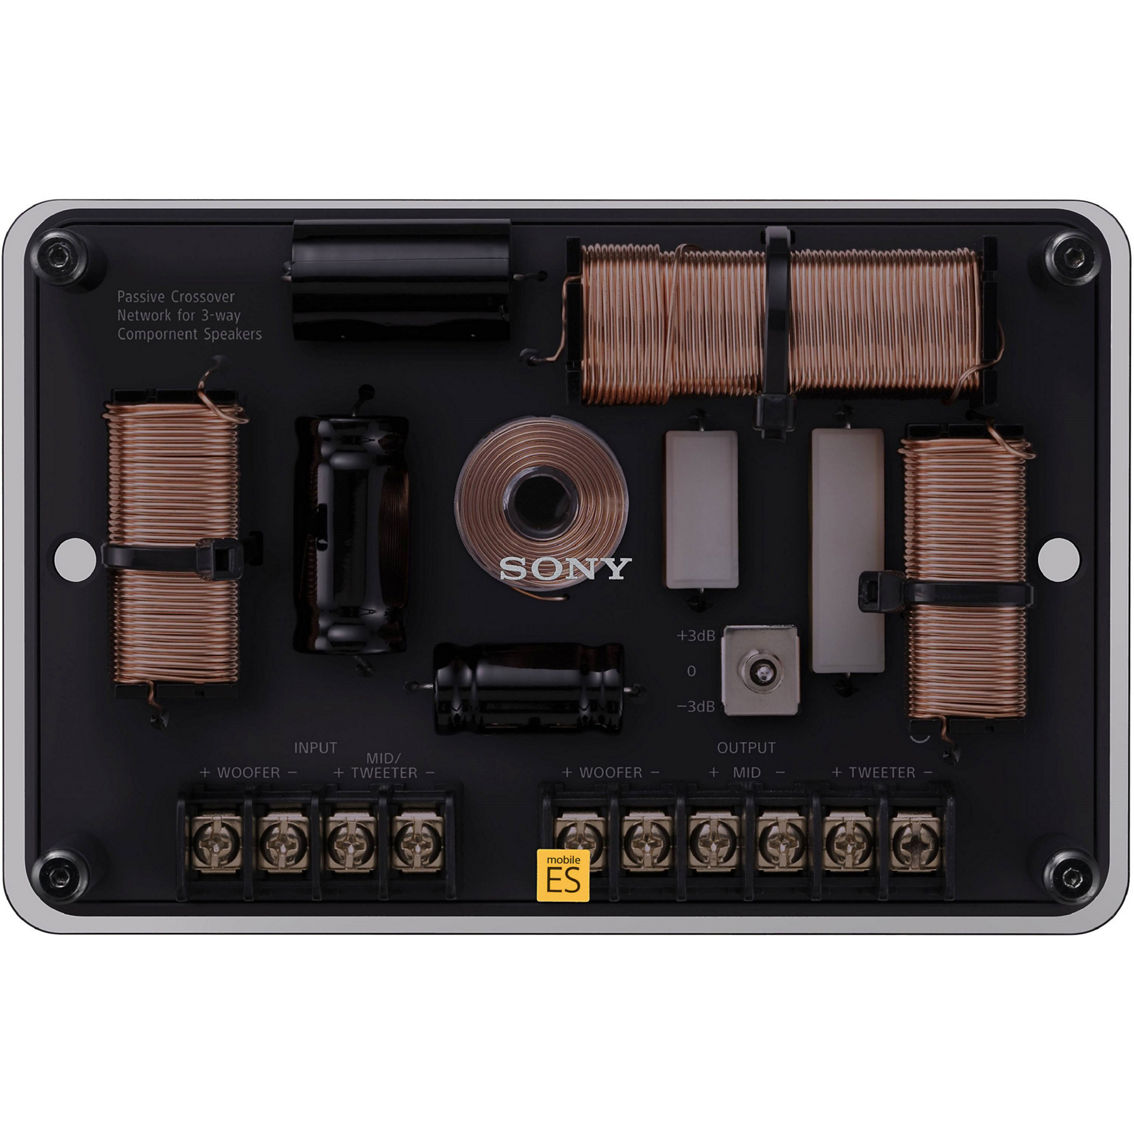 Sony XS163ES Mobile ES 6.5 in. 3 Way Component Speakers - Image 3 of 9